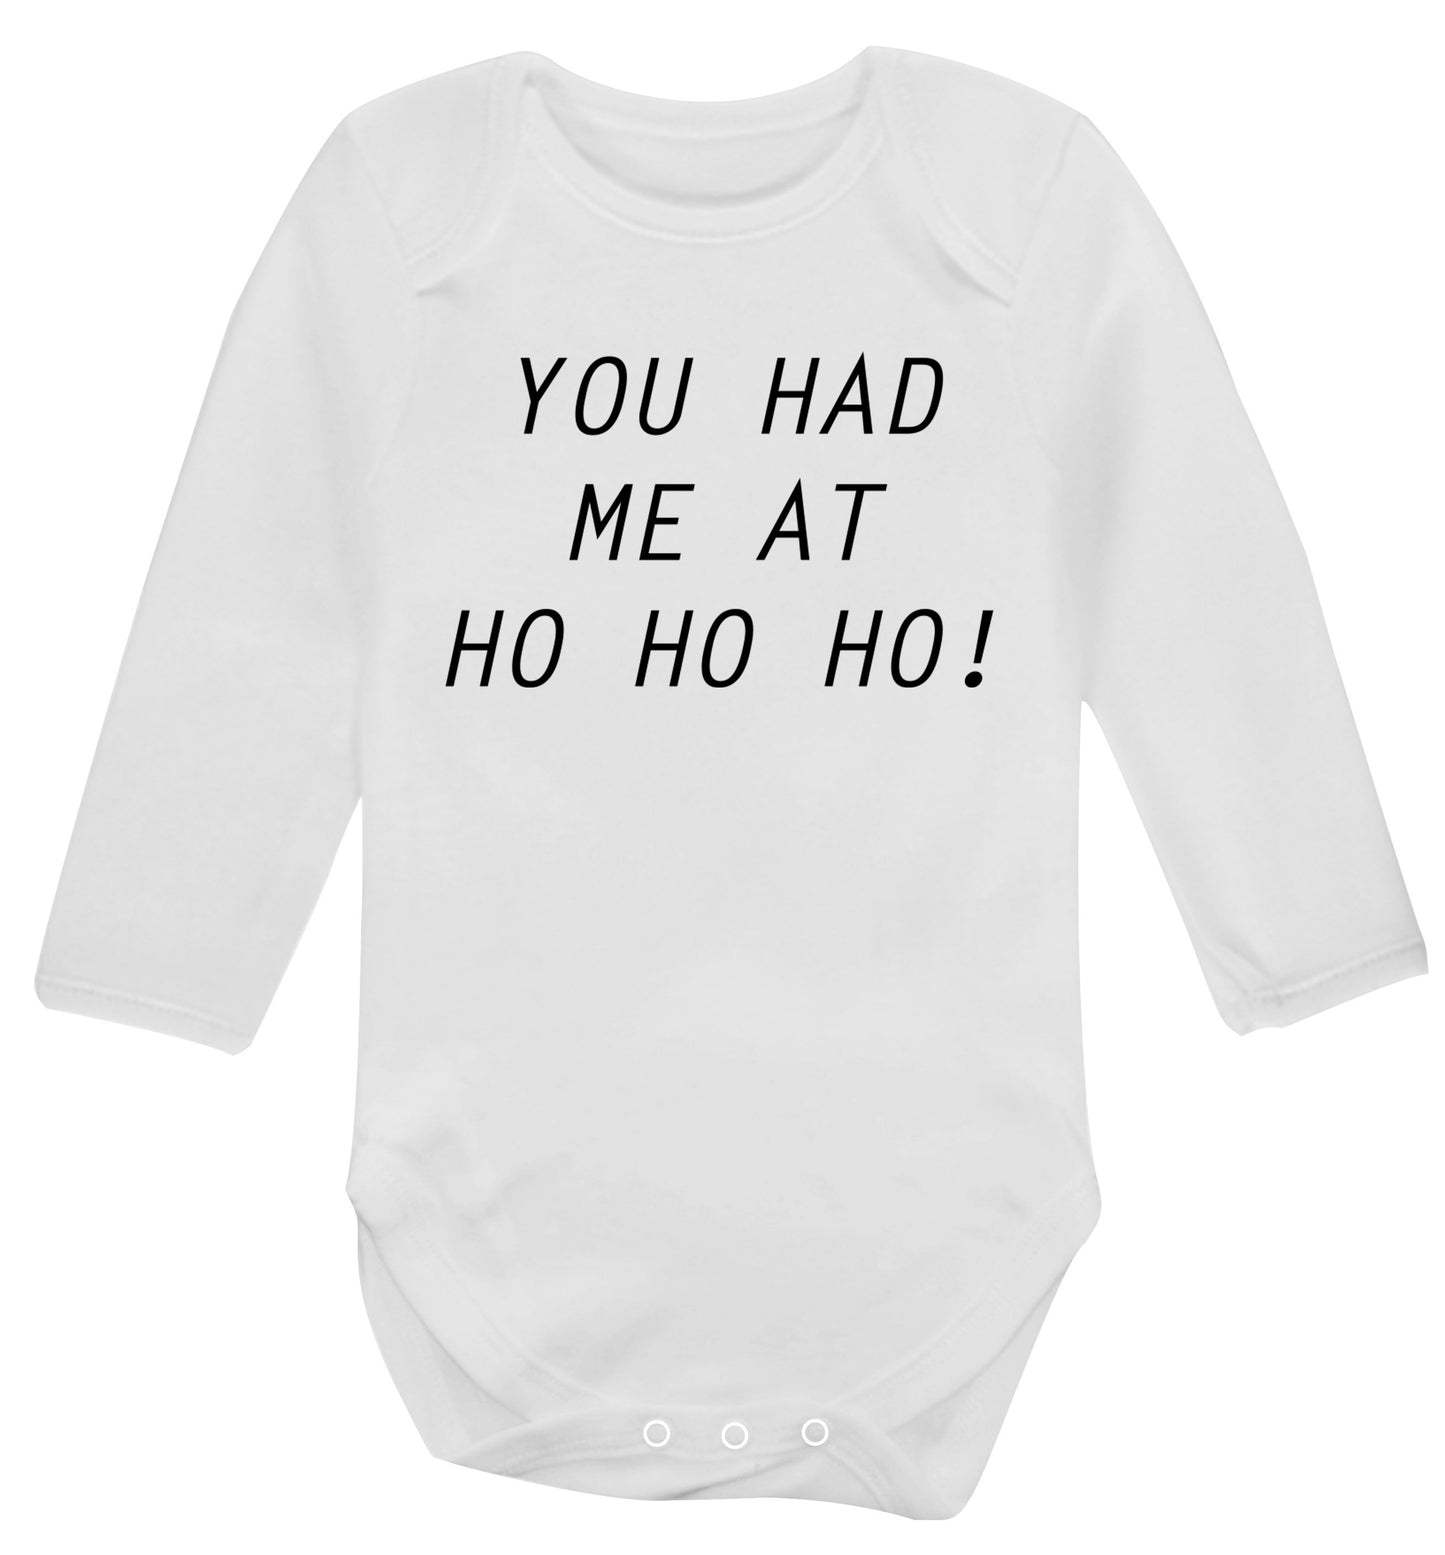 You had me at ho ho ho Baby Vest long sleeved white 6-12 months